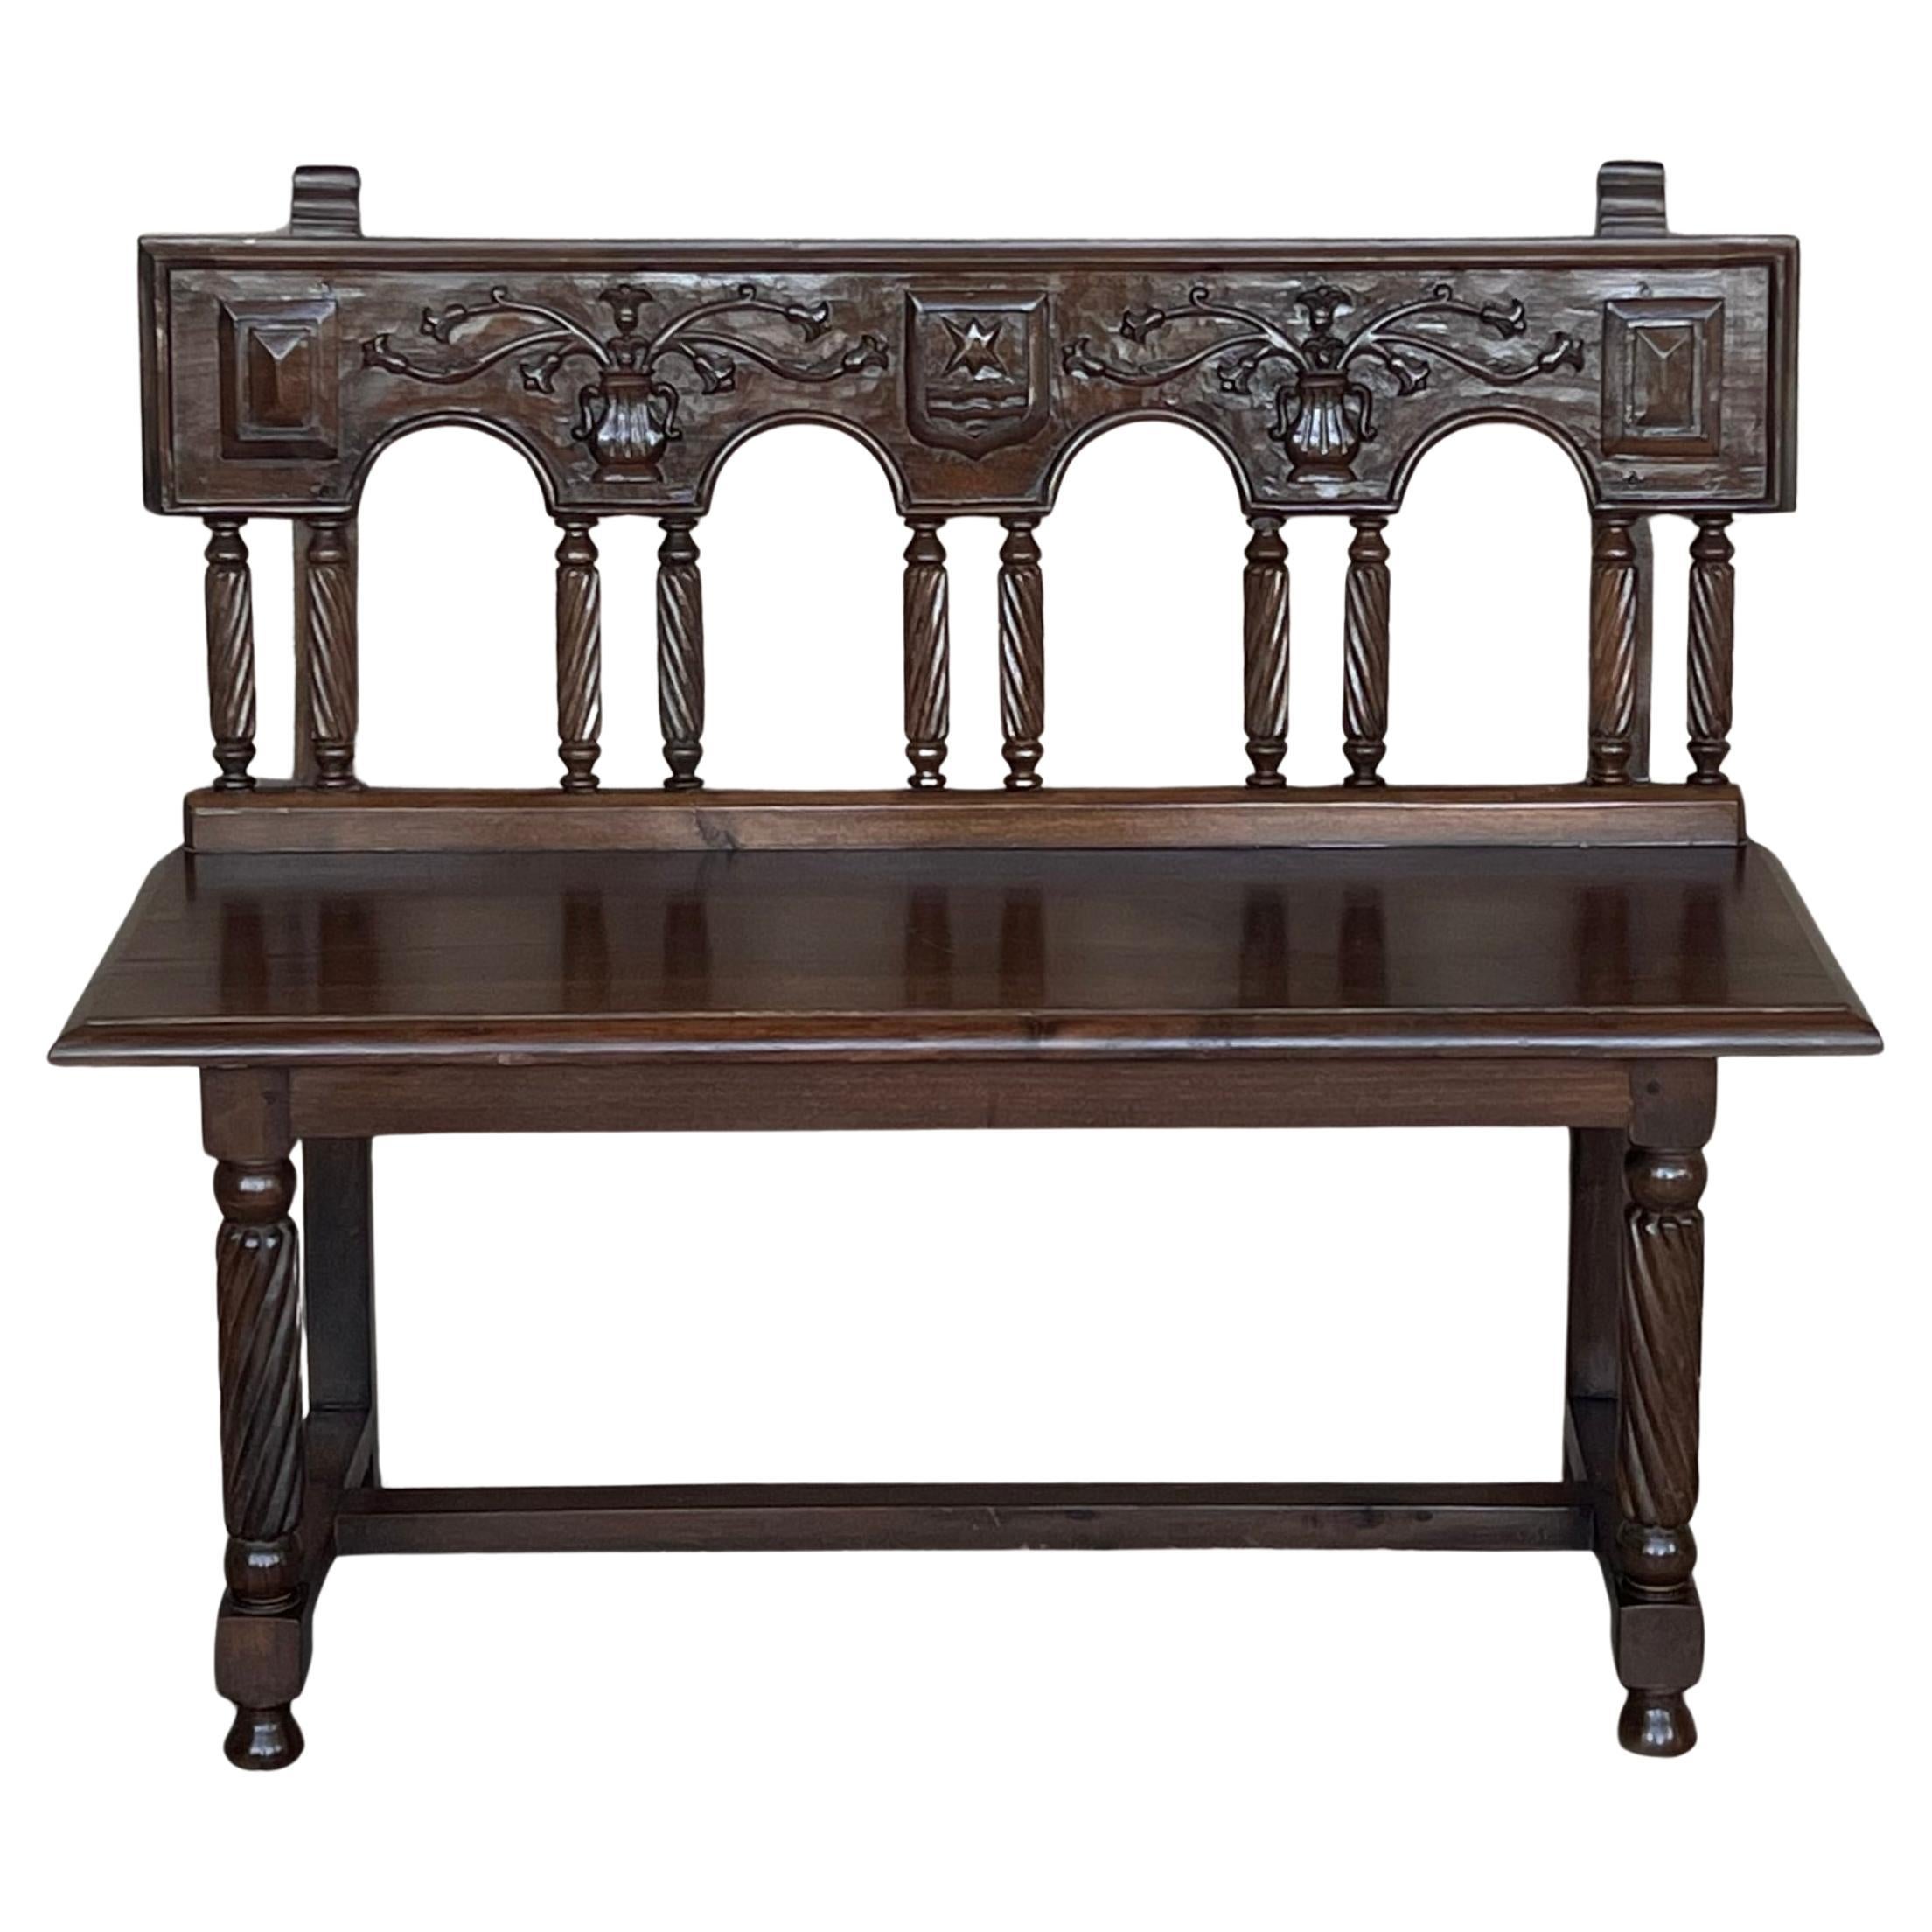 20th Century Spanish Renaissance Carved Walnut Bench Banquette "Escaño" For Sale